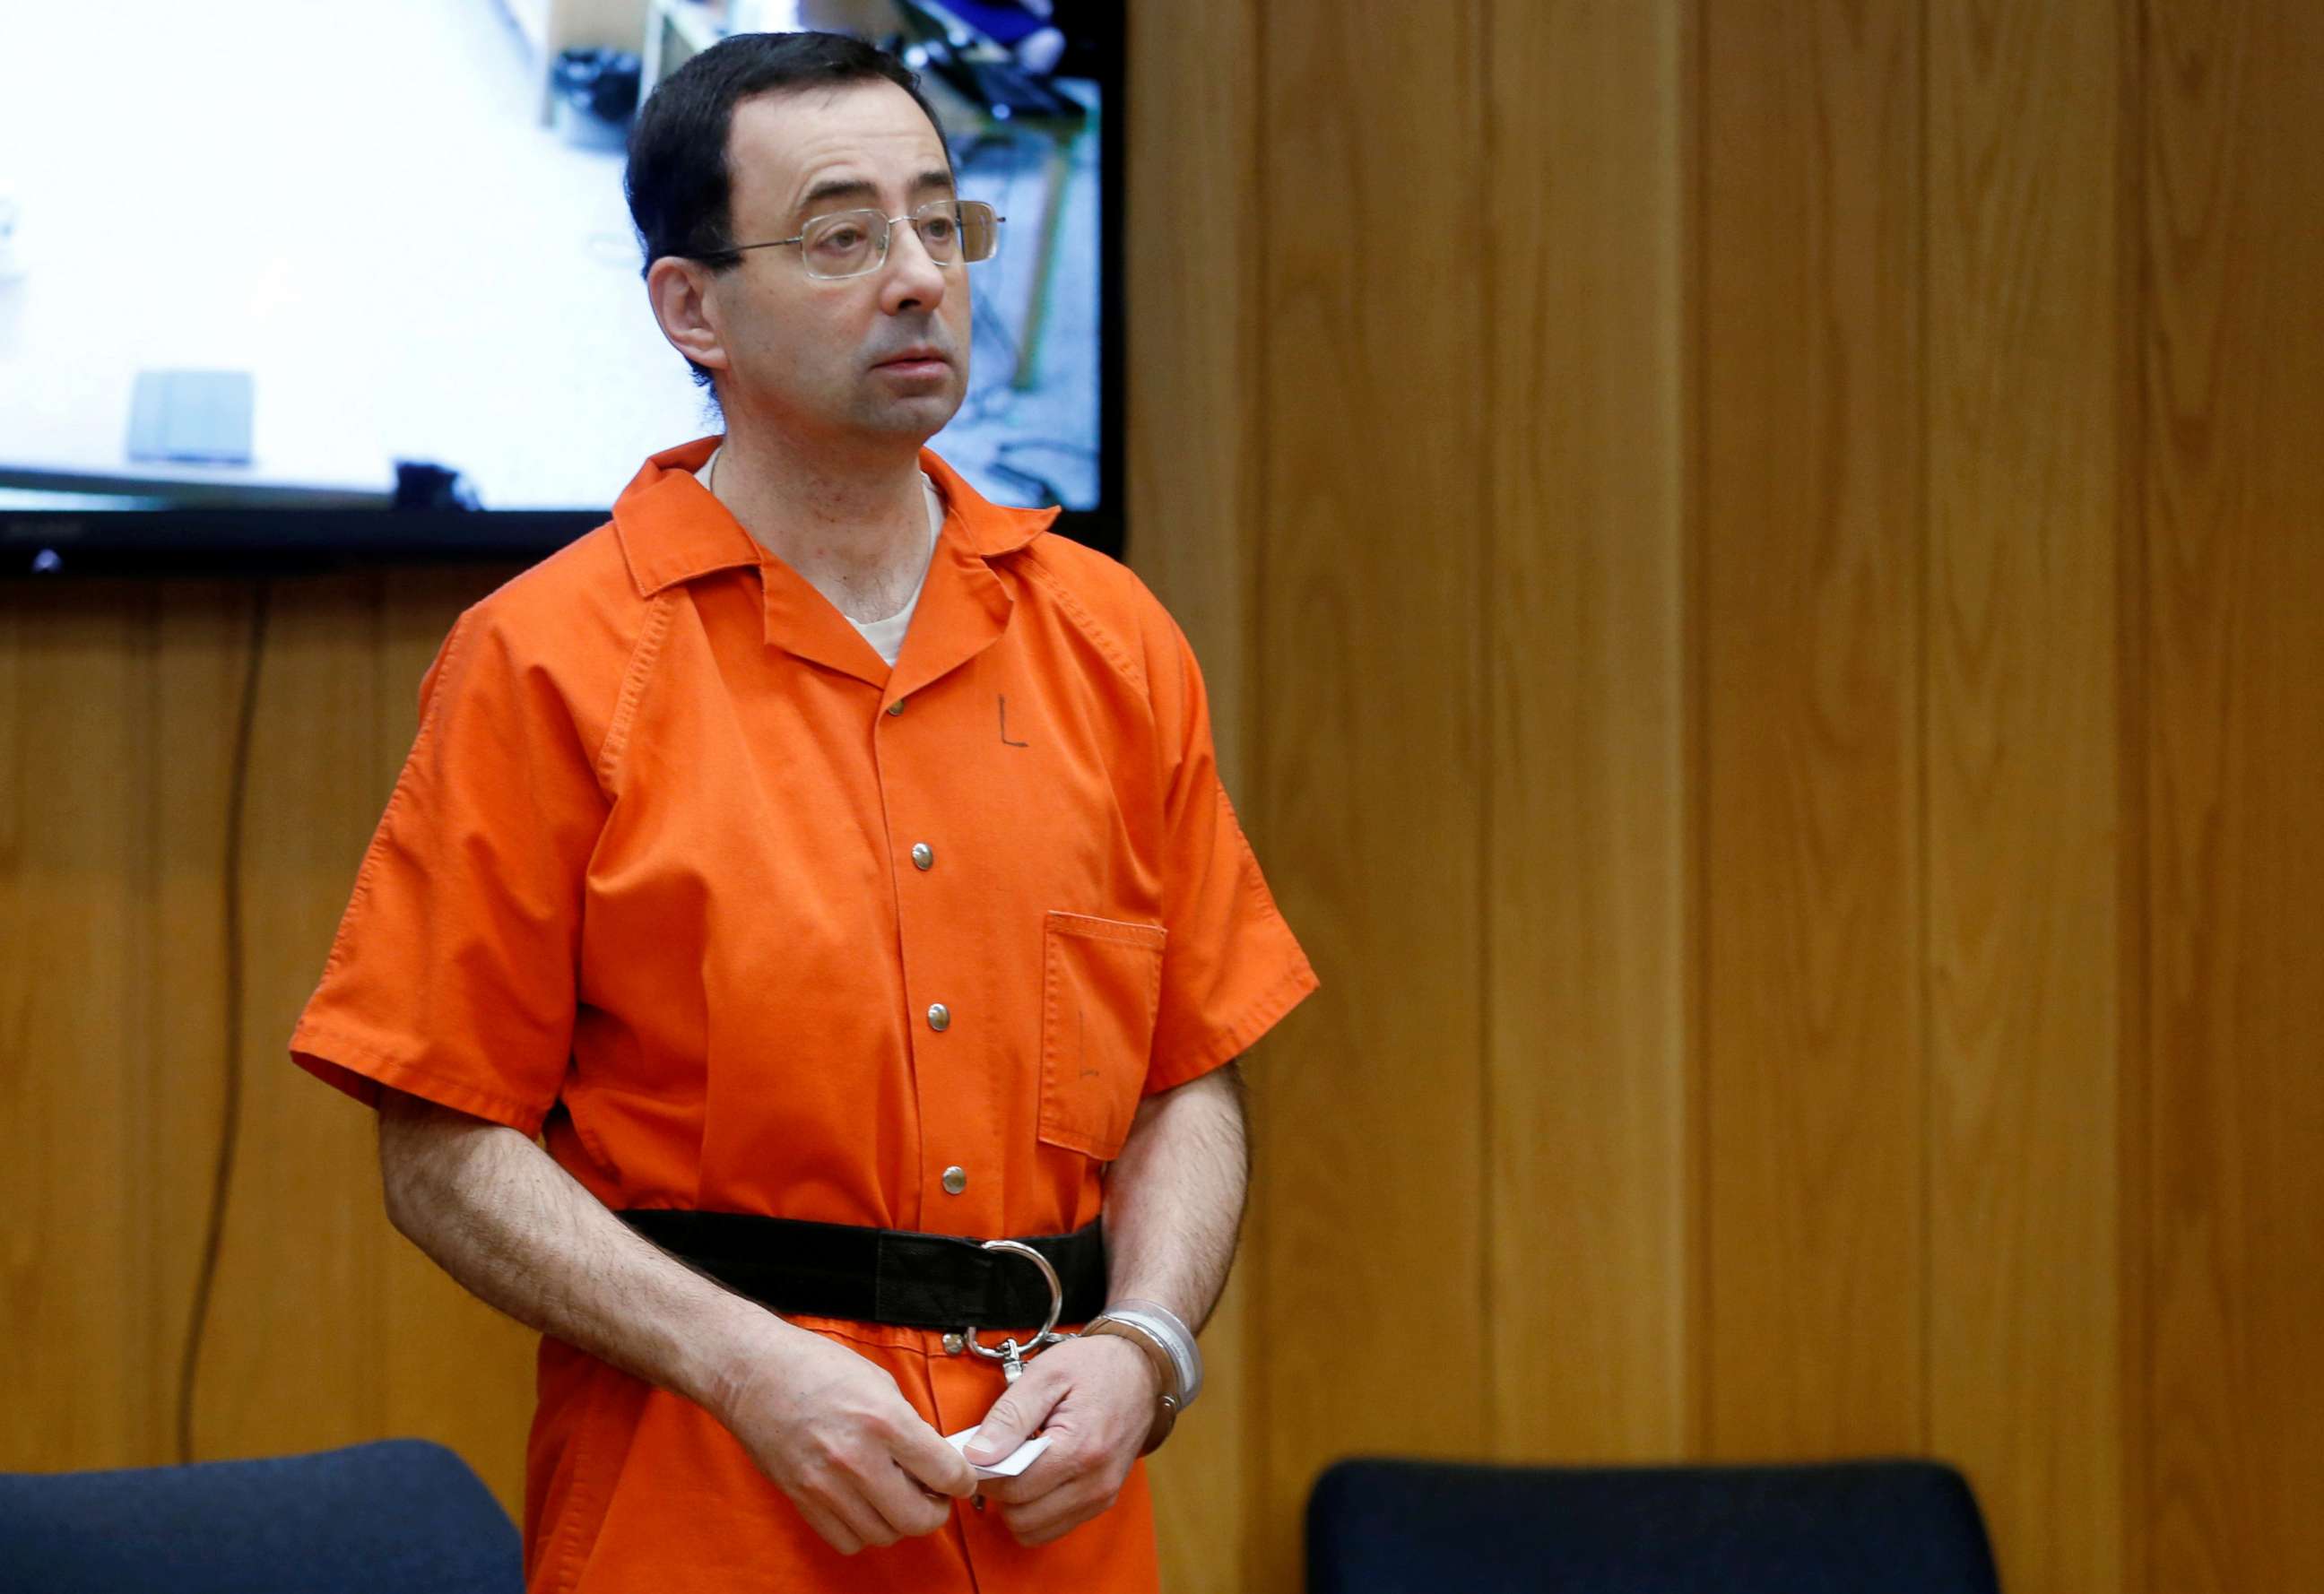 FILE PHOTO: Larry Nassar, a former team USA Gymnastics doctor who pleaded guilty in November 2017 to sexual assault charges, stands in court during his sentencing hearing in the Eaton County Court in Charlotte, Michigan, U.S., Feb. 5, 2018.  